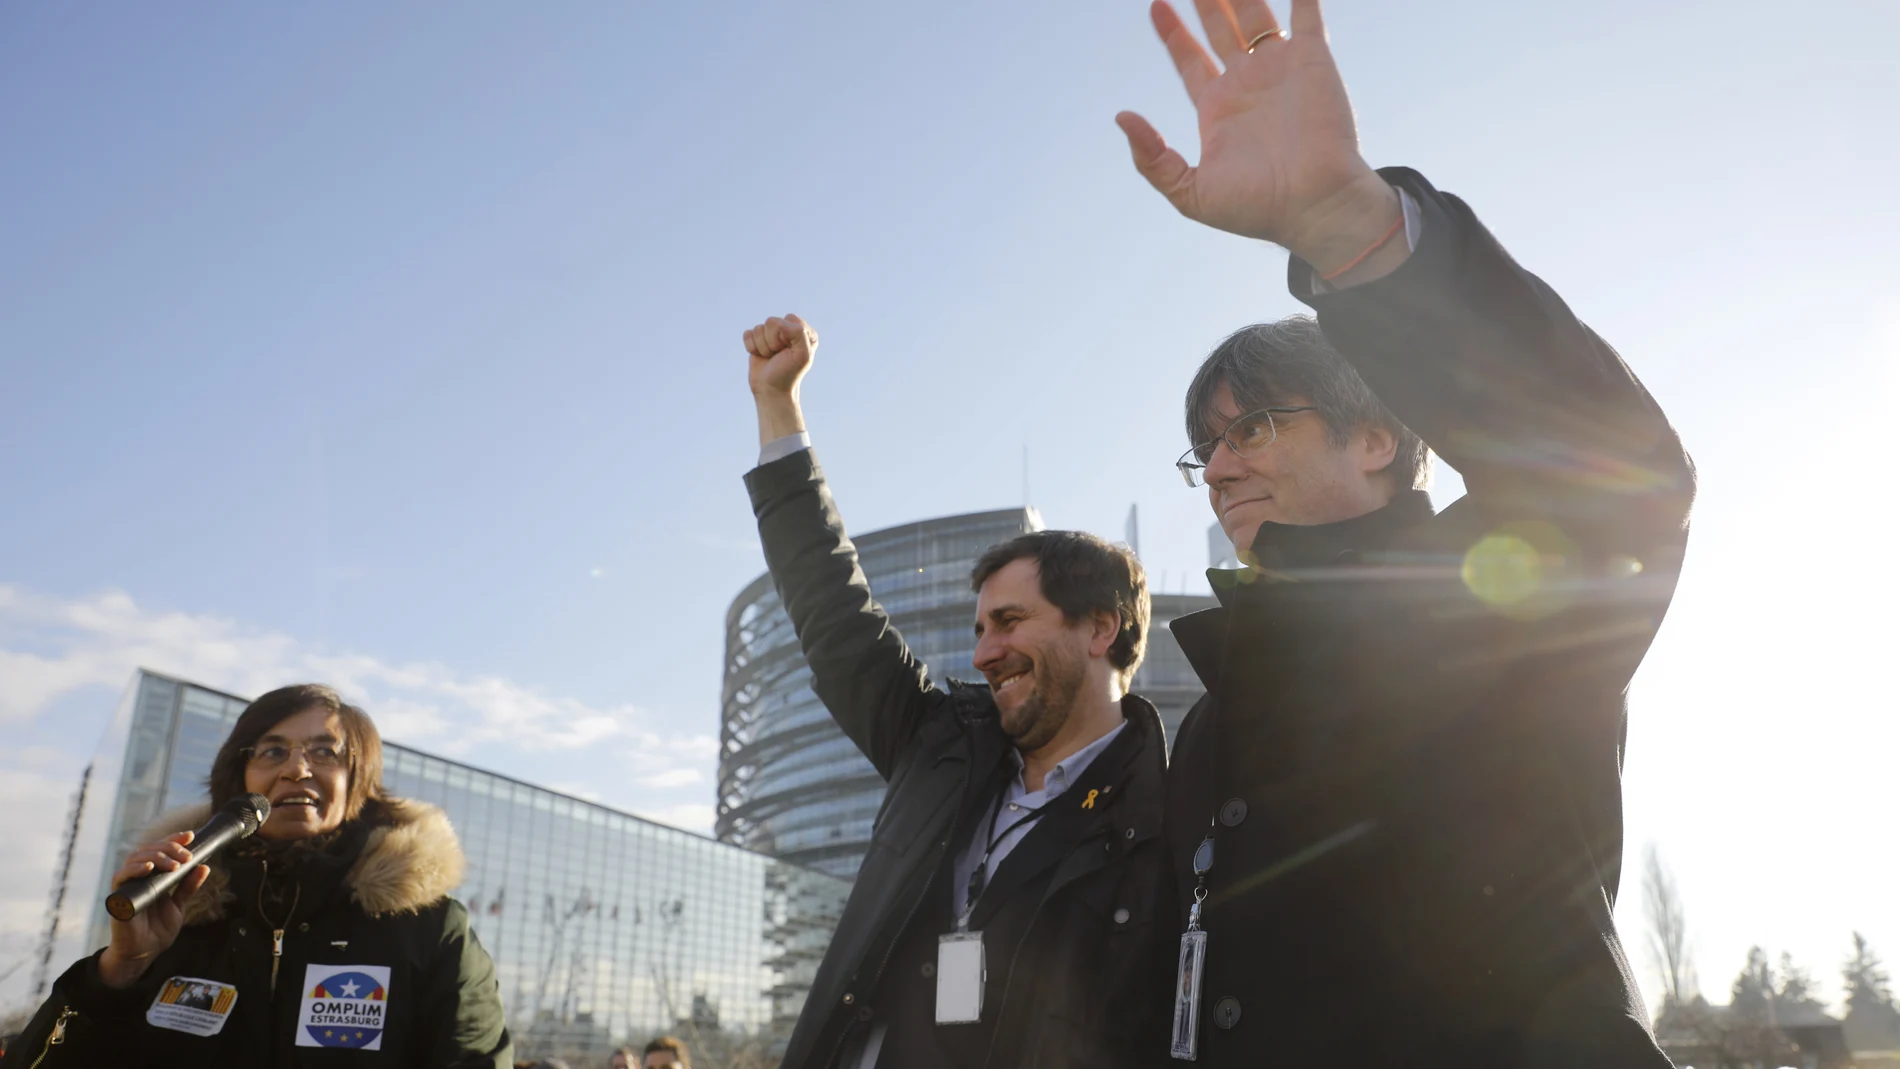 Catalan leader Carles Puigdemont, right, and former Catalan regional minister Antoni Comin react outside the European Parliament Monday Jan.13 2020 in Strasbourg, eastern France. Catalan leader Carles Puigdemont is expected to attend his first session as a member of the European Parliament on Monday despite facing an arrest warrant against him in Spain.(AP Photo/Jean-Francois Badias)